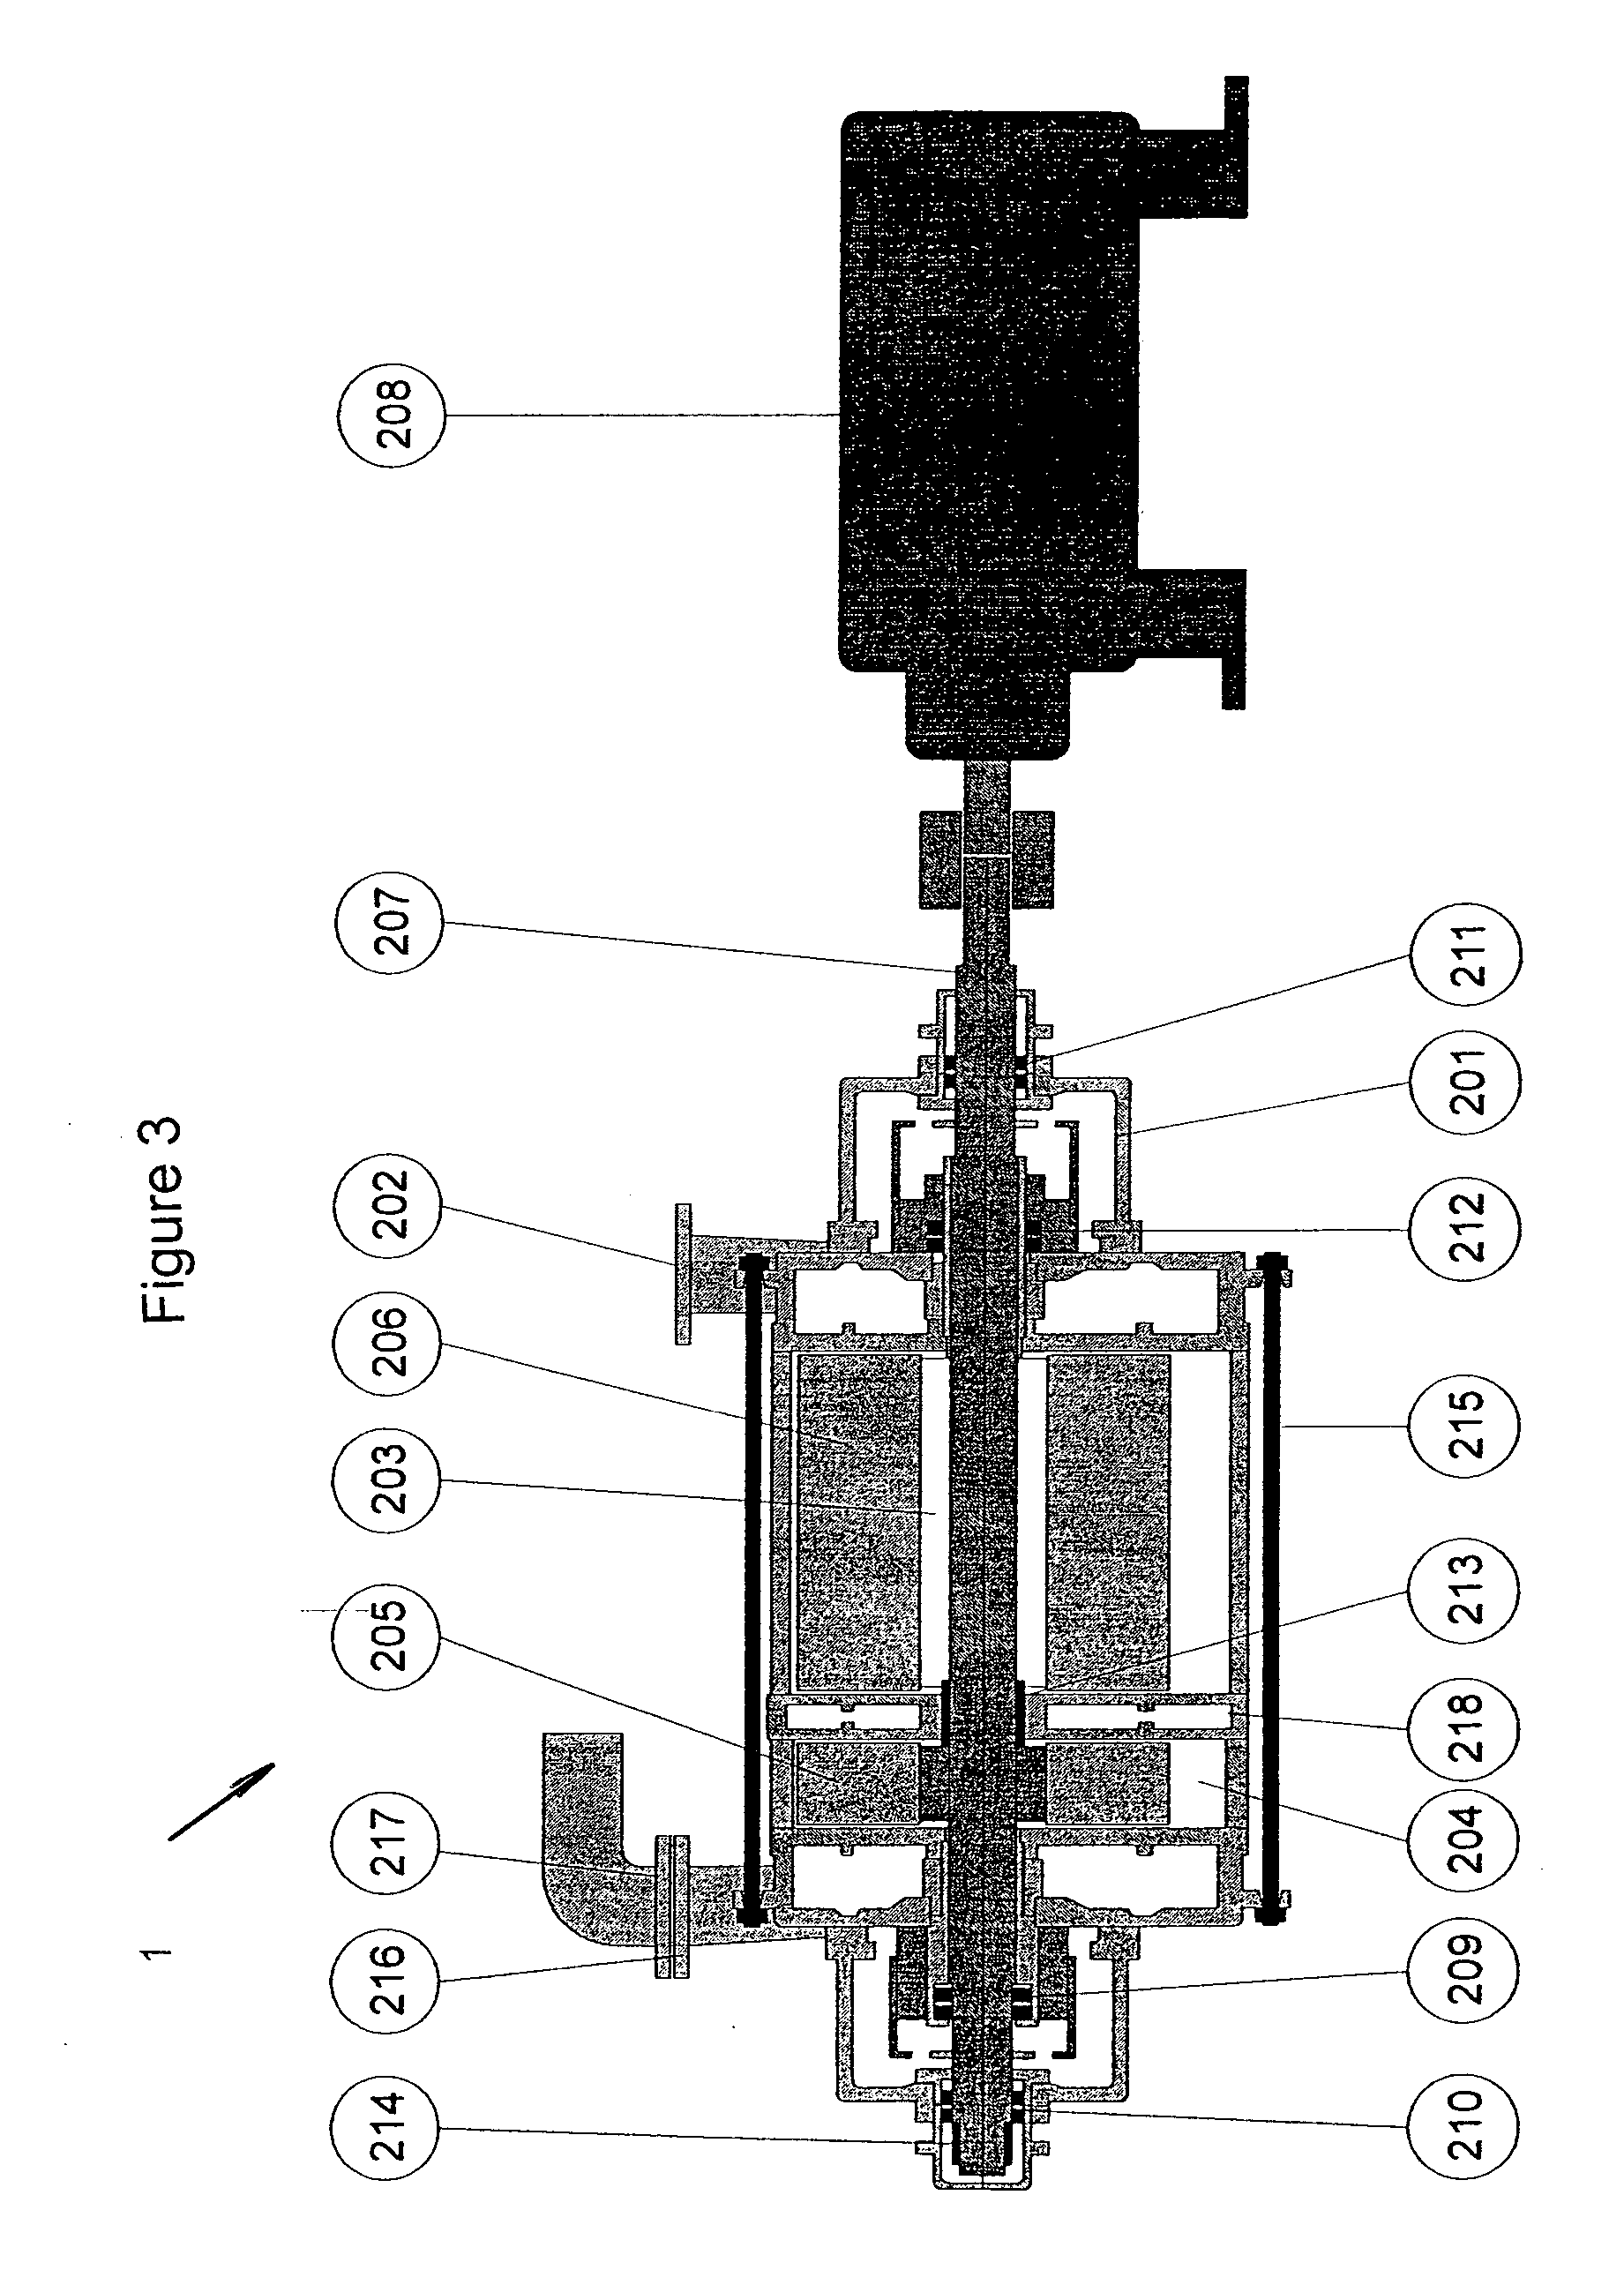 High-speed chamber mixer for catalytic oil suspensions as a reactor for the depolymerization and polymerization of hydrocarbon-containing residues in the oil circulation to obtain middle distillate